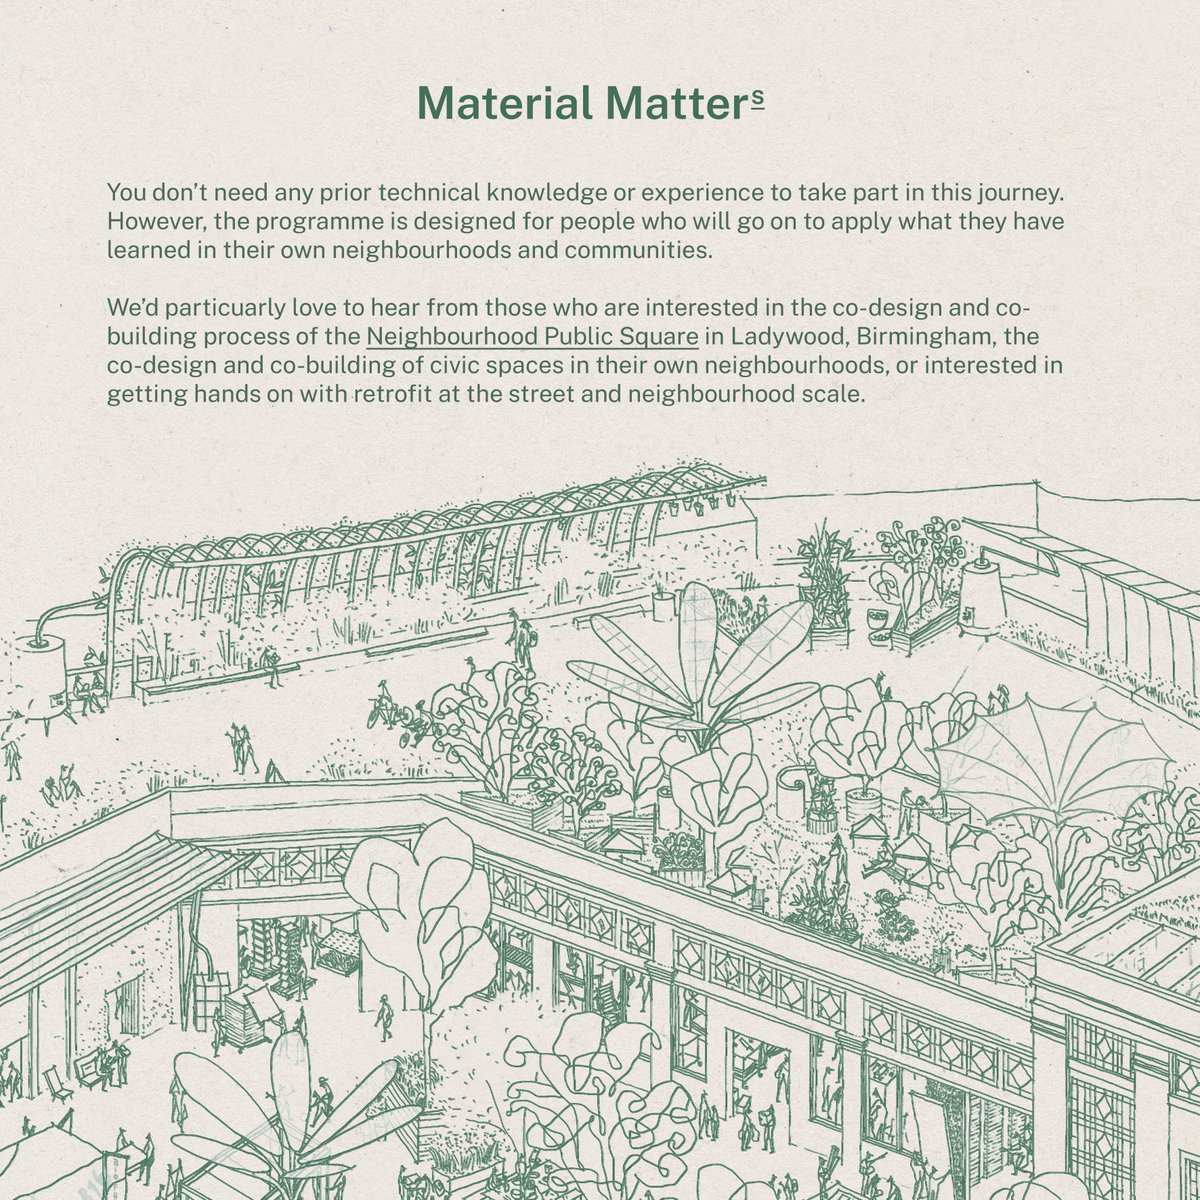 “Whenever we build, we either contribute to or counteract dominant processes of change.” —Material Cultures APPLY: bit.ly/MaterialMatterS